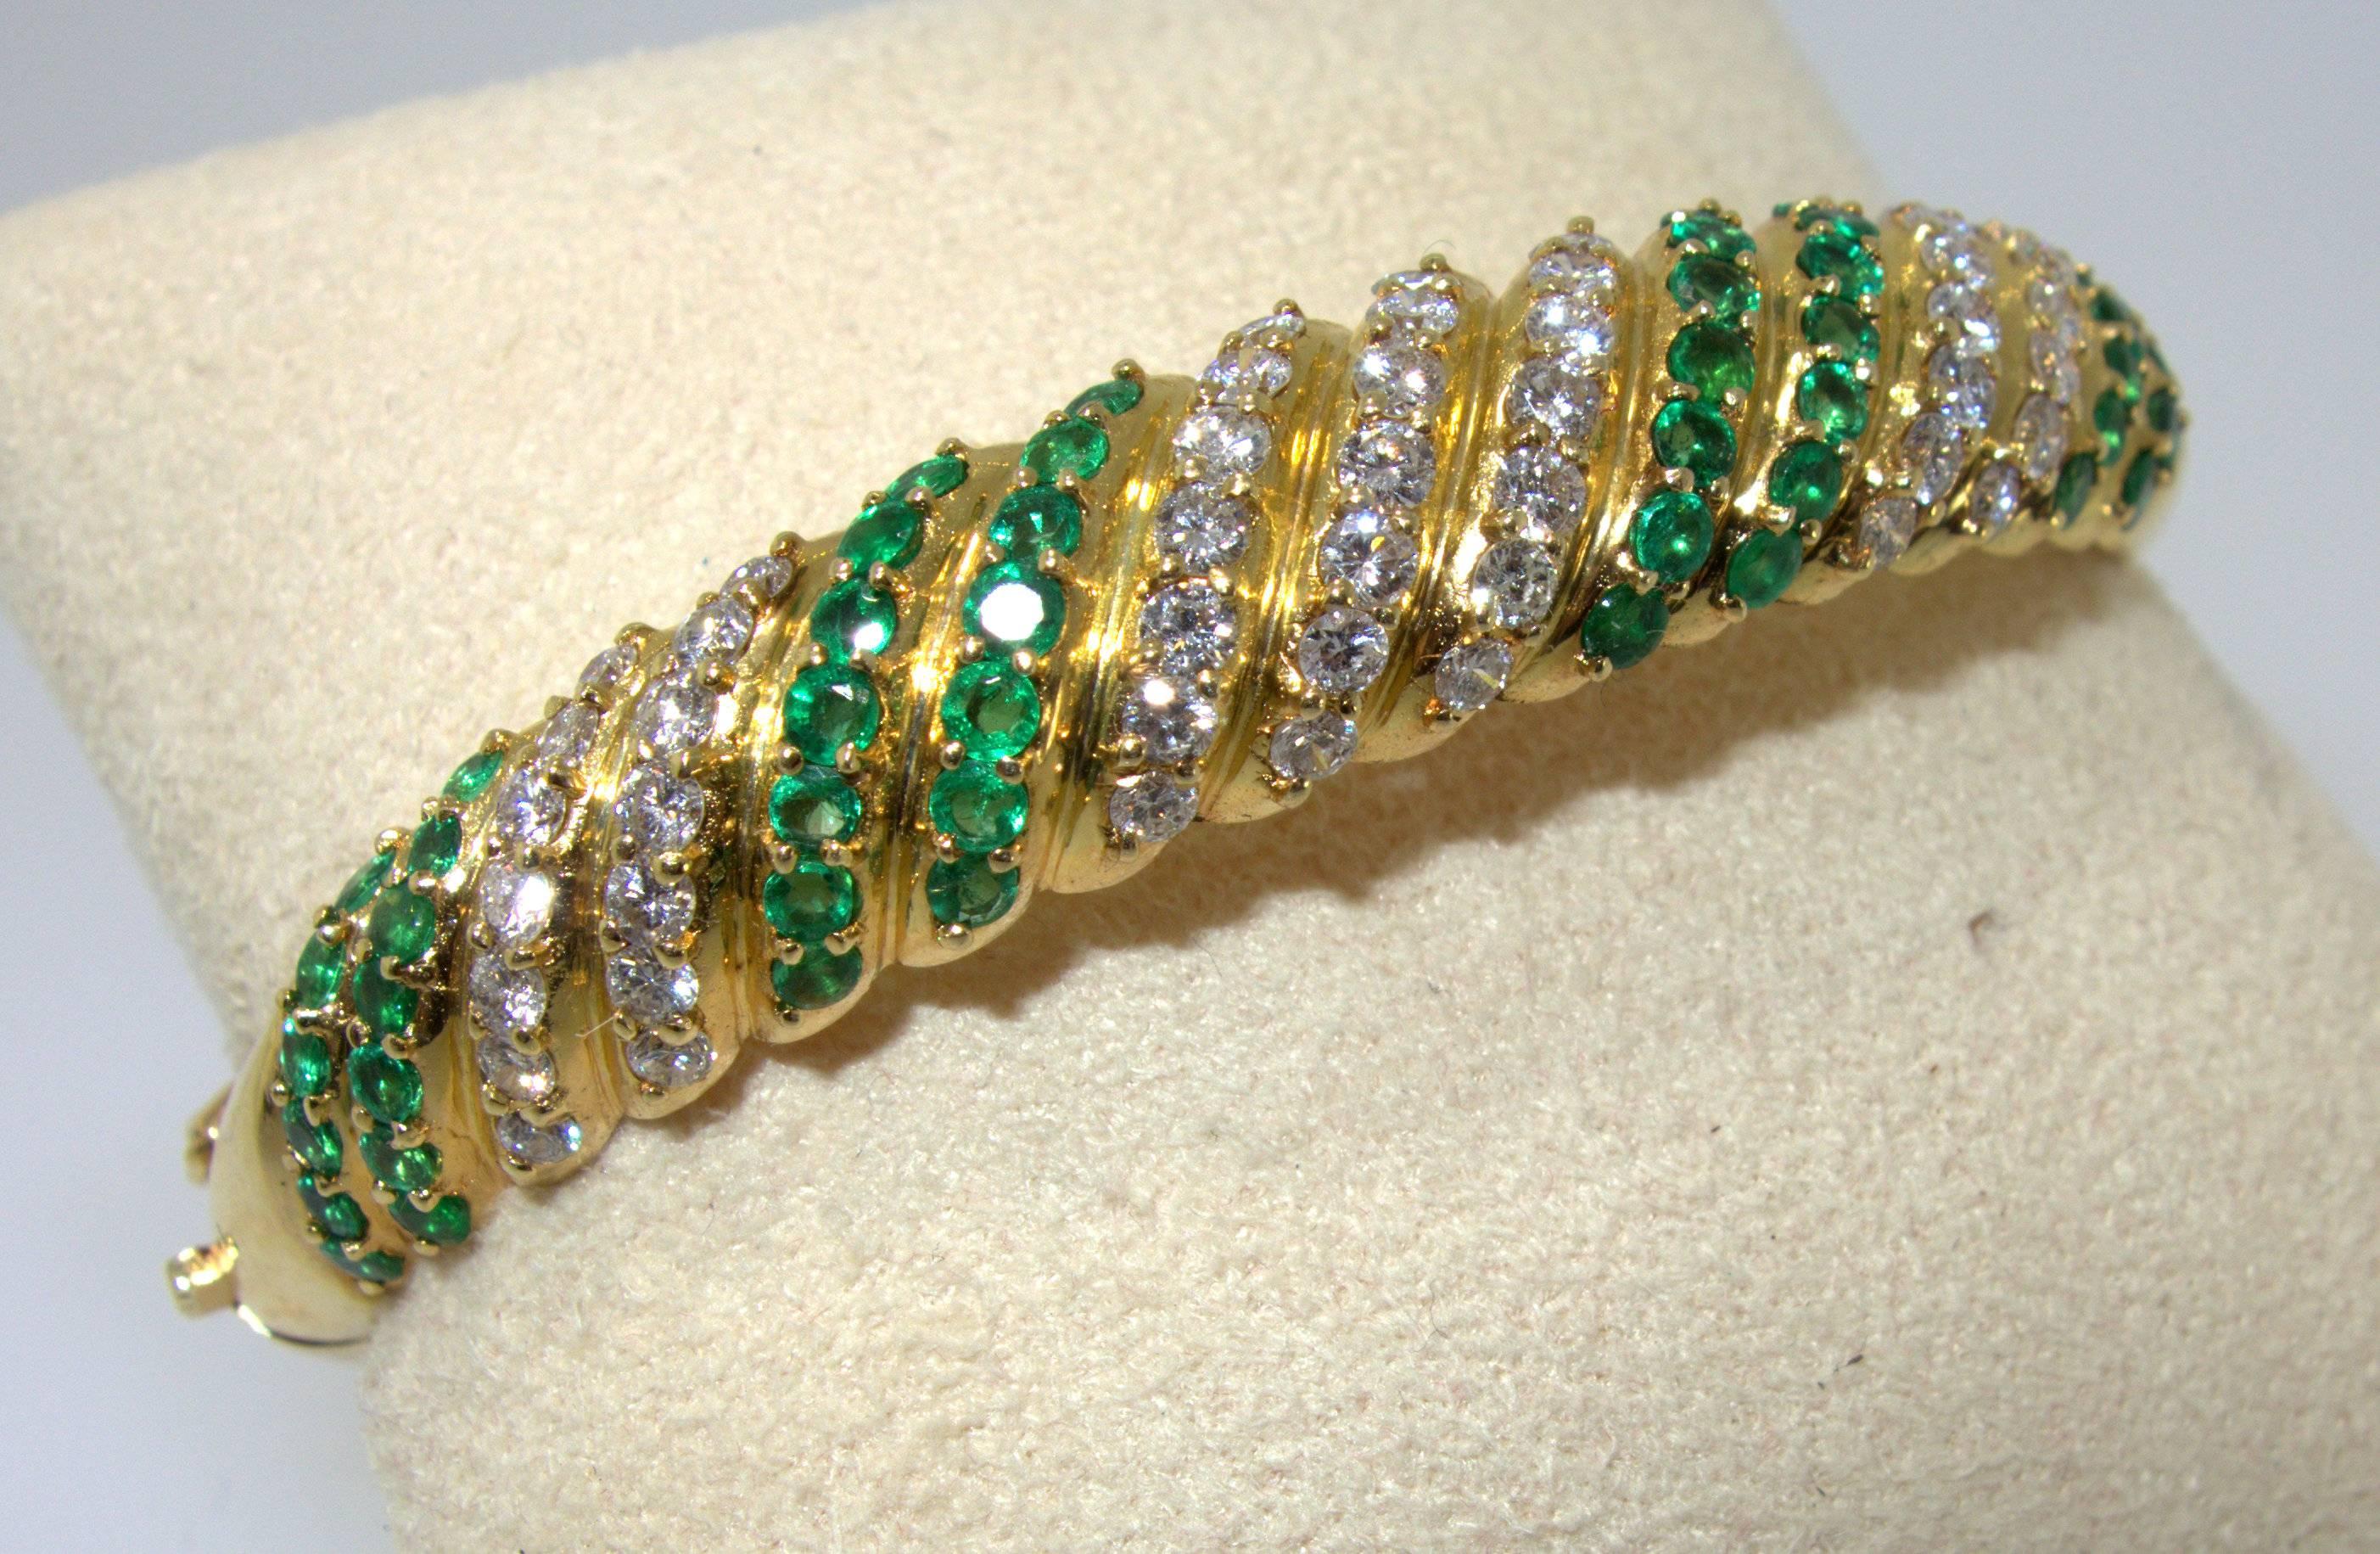 Bright green emeralds and white diamonds are set into this lovely gold bangle bracelet.  The size is medium and will fit almost all wrists. The interior circumferences is approximately 7 inches.  The 49 diamonds are all well matched, white (H/I),